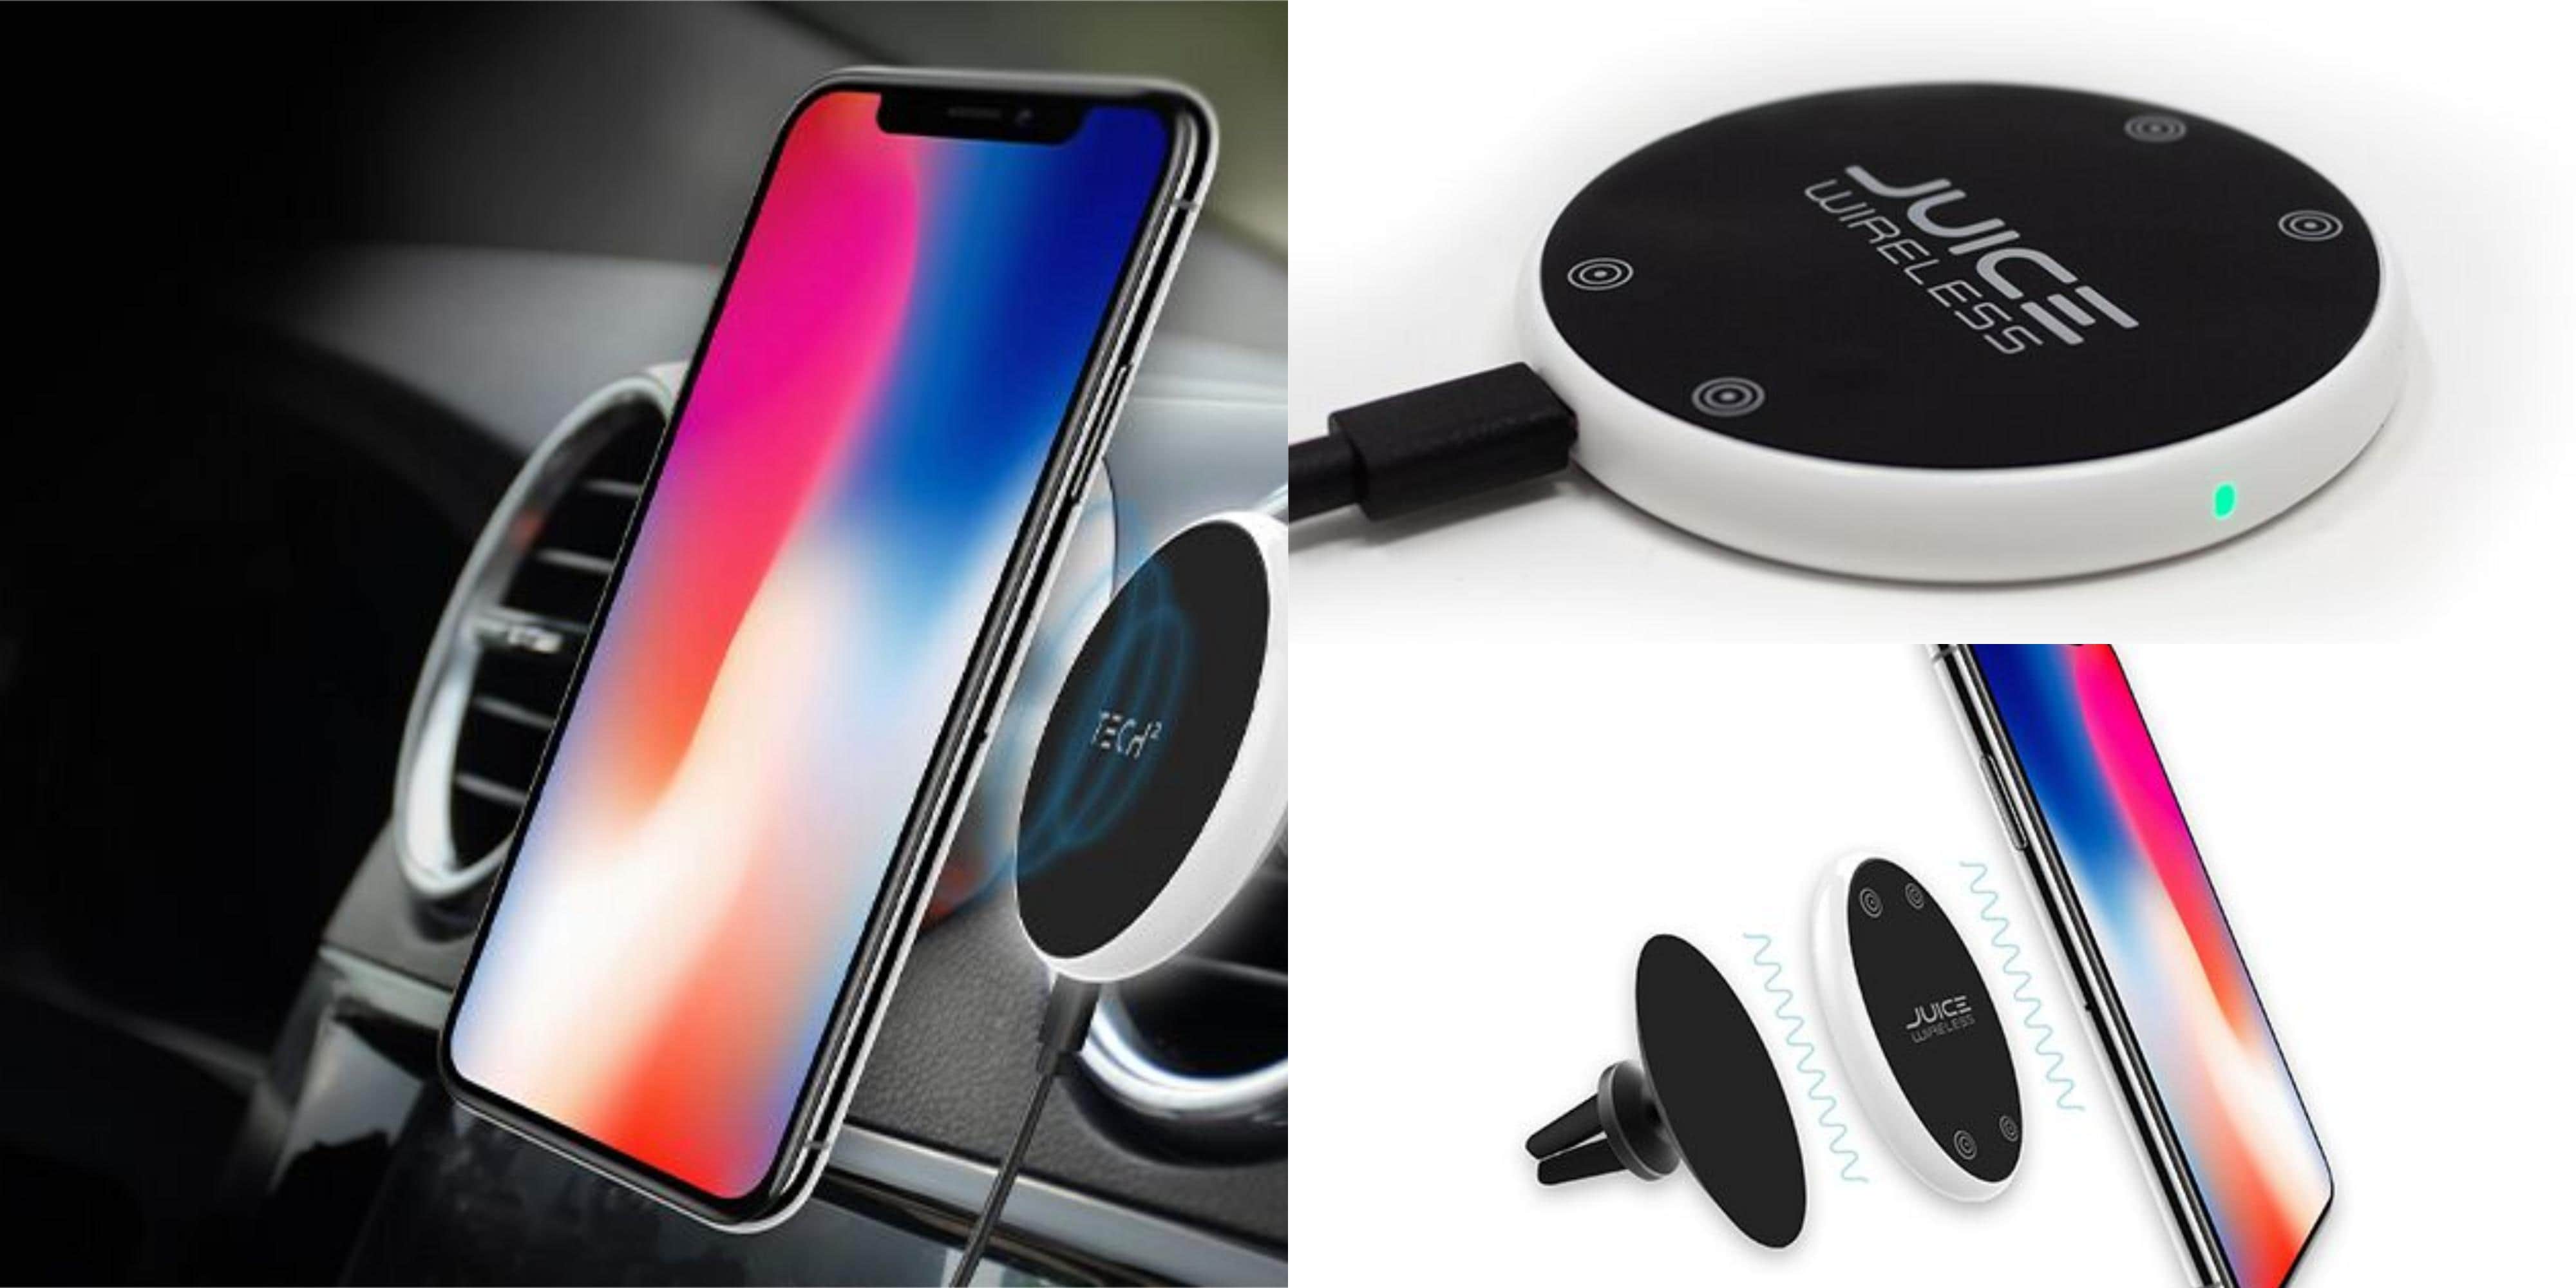 This sleek wireless charger sports anti-stick surface, so it's as solid in your car as on your desk.